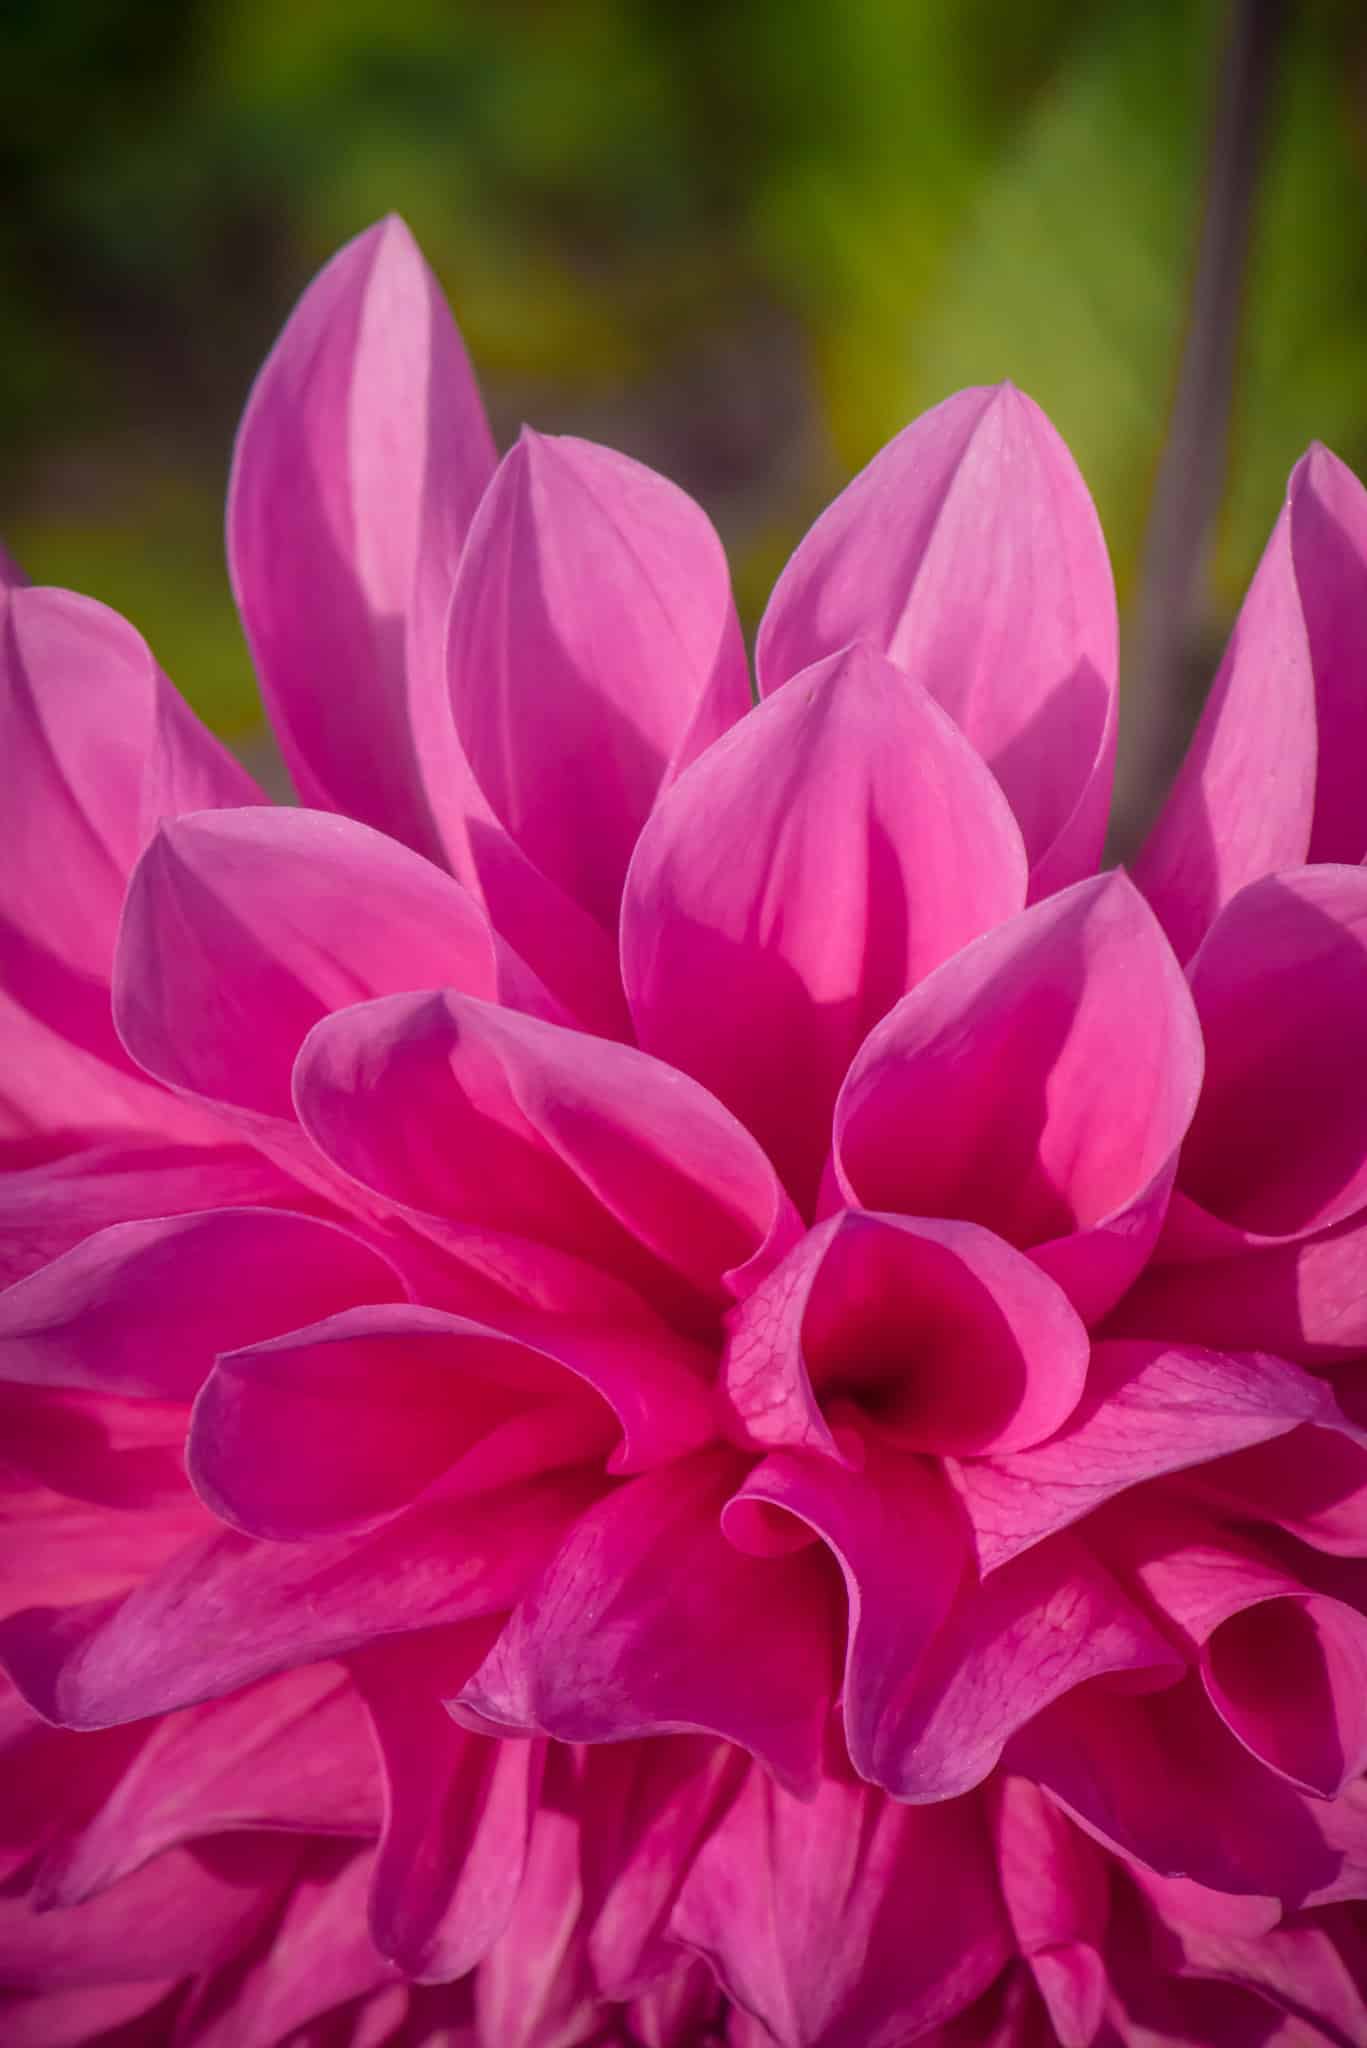 These dahlias were growing along the sidewalk in the Mapleton Hill Neighborhood of Boulder, Colorado.